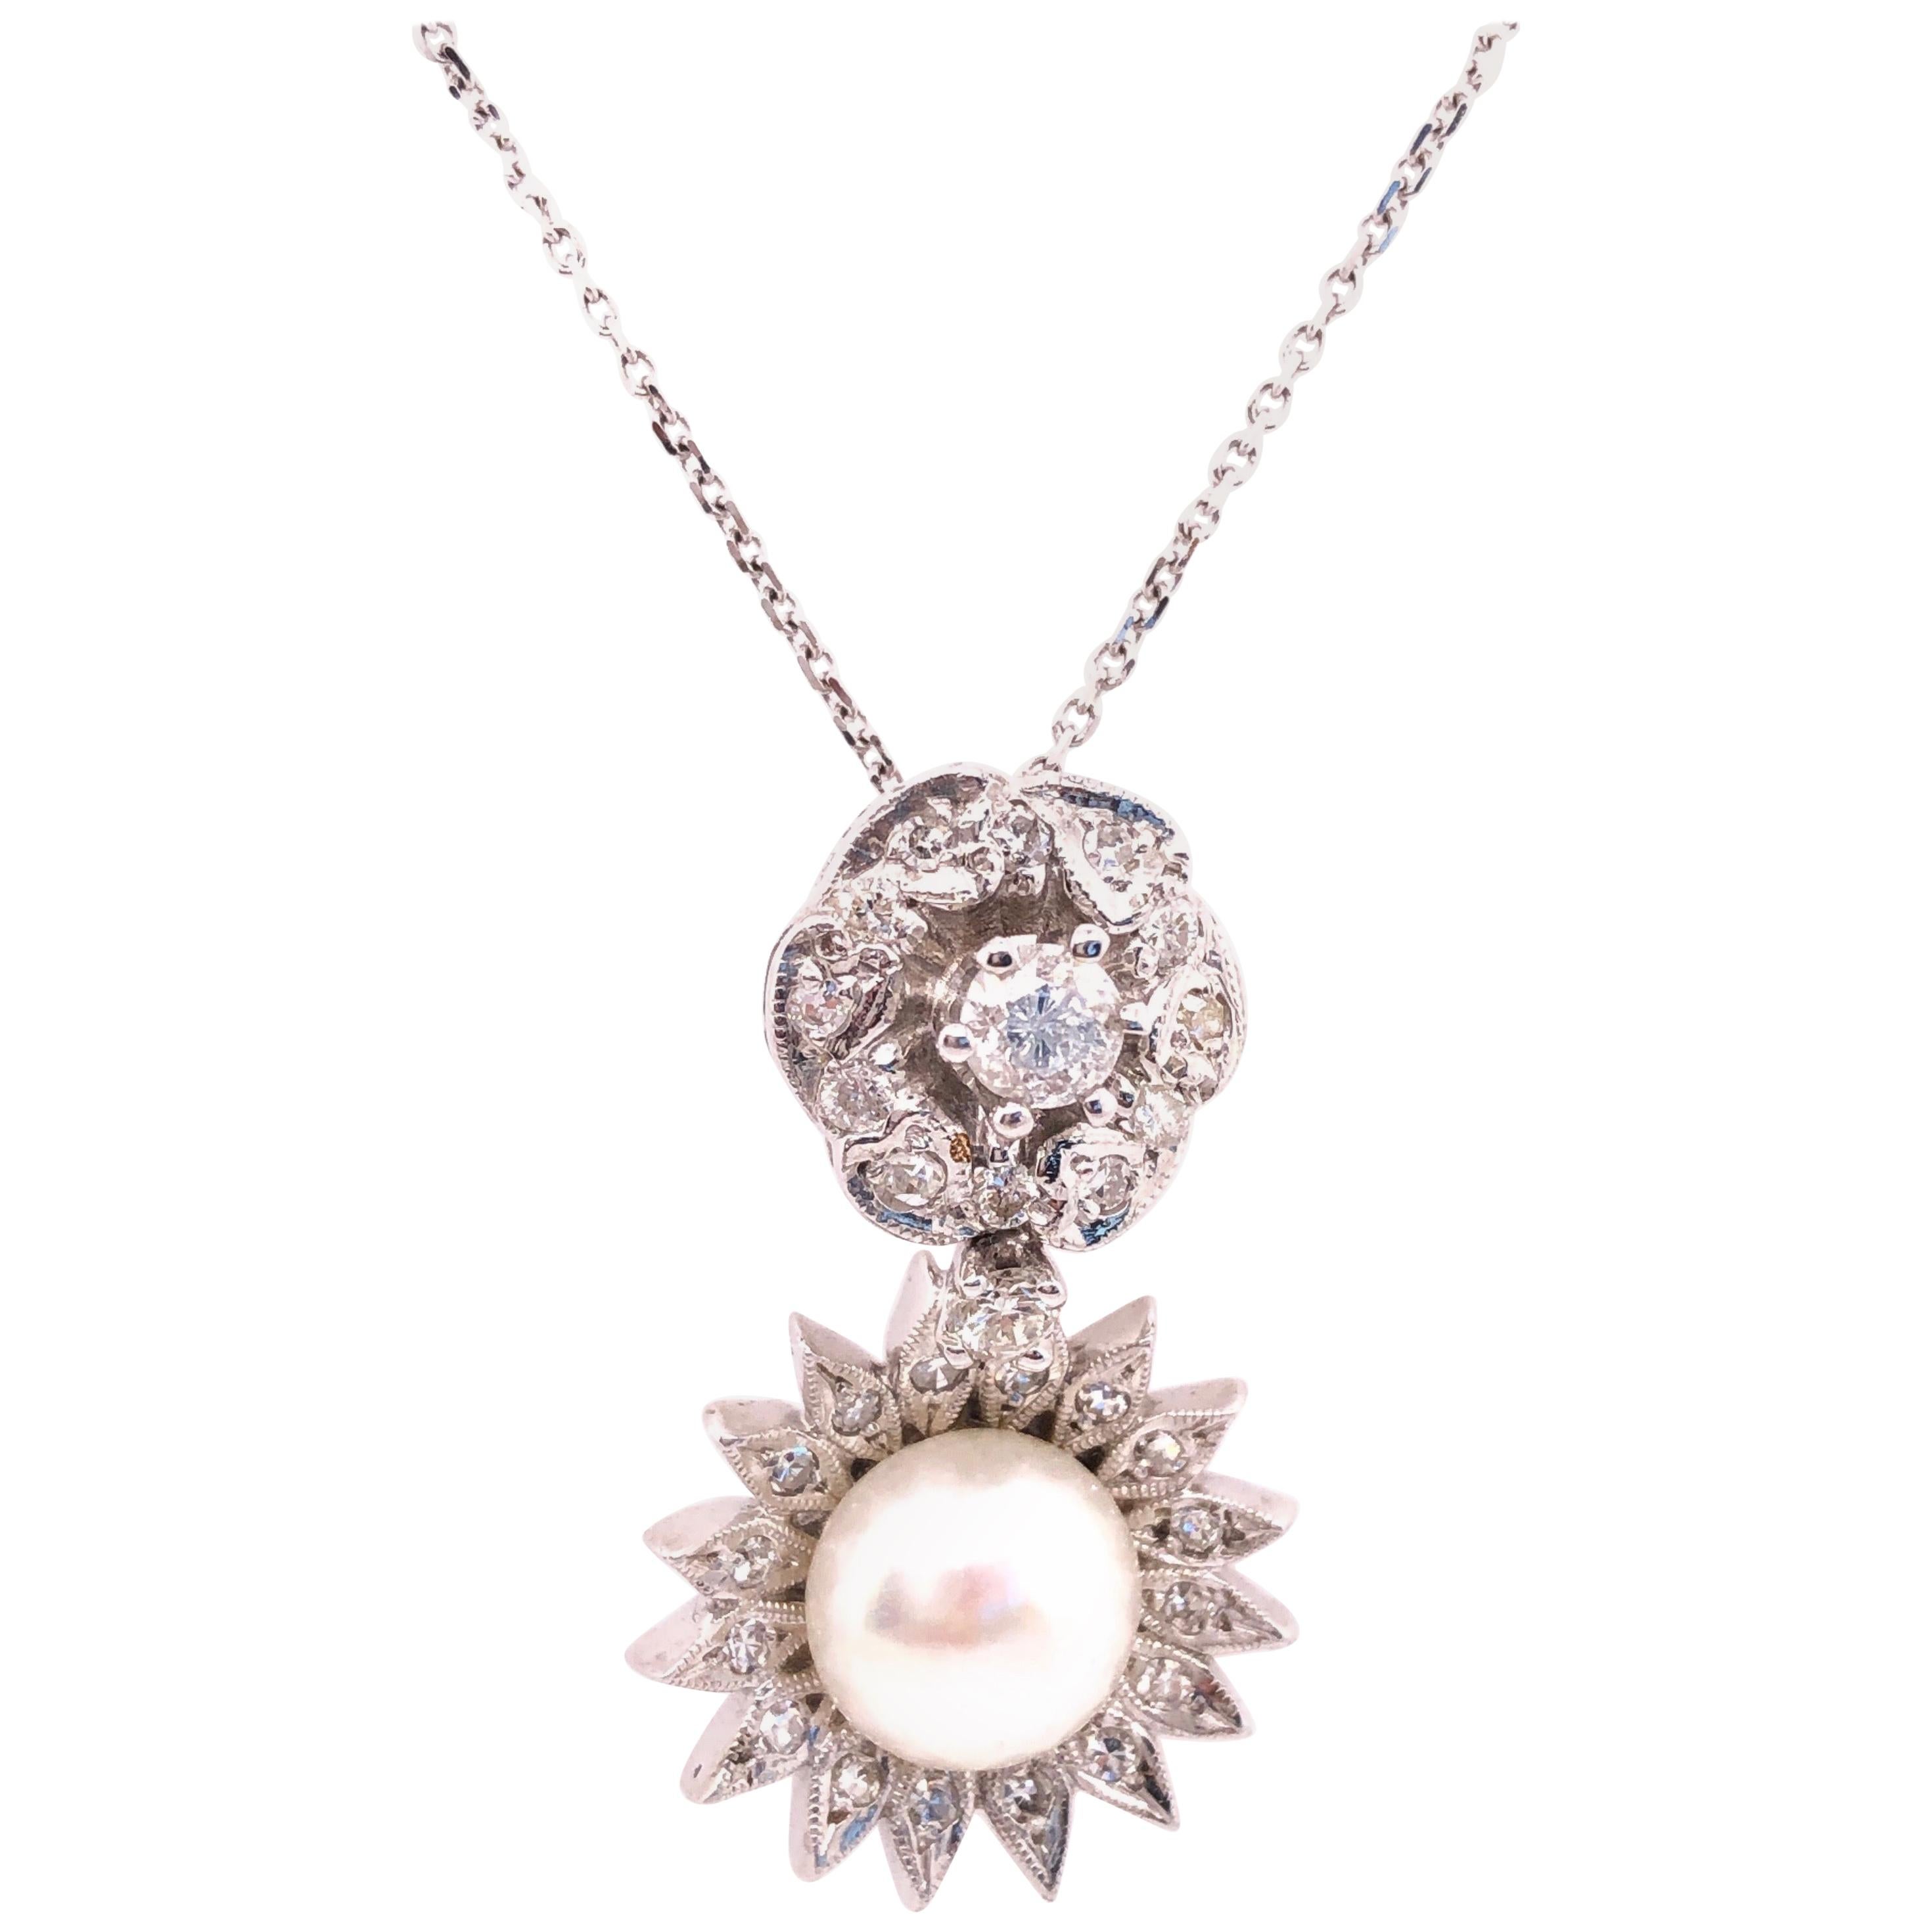 14 Karat White Gold Necklace with Diamond and Cultured Pearl Pendant